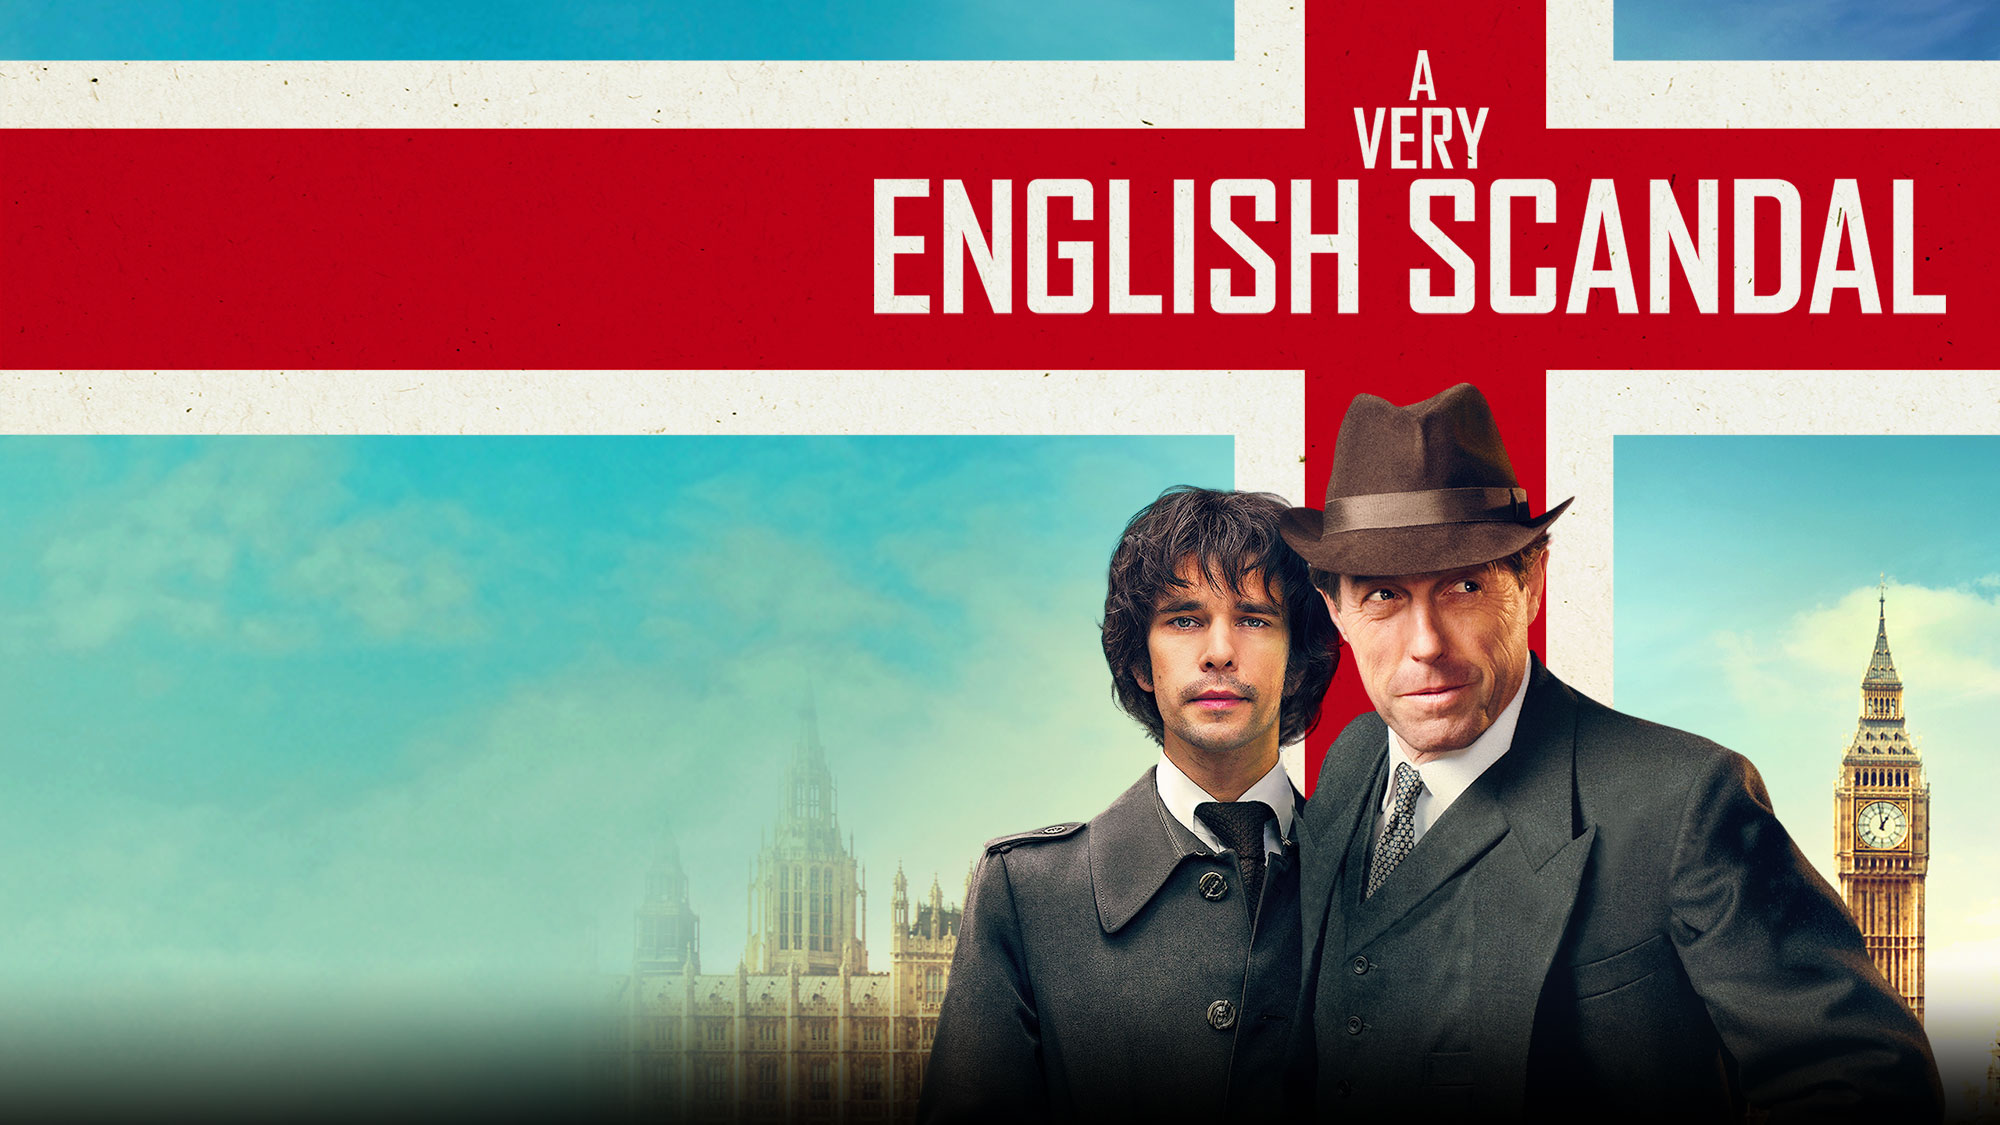 A Very English Scandal [credit: courtesy of TIMvision]